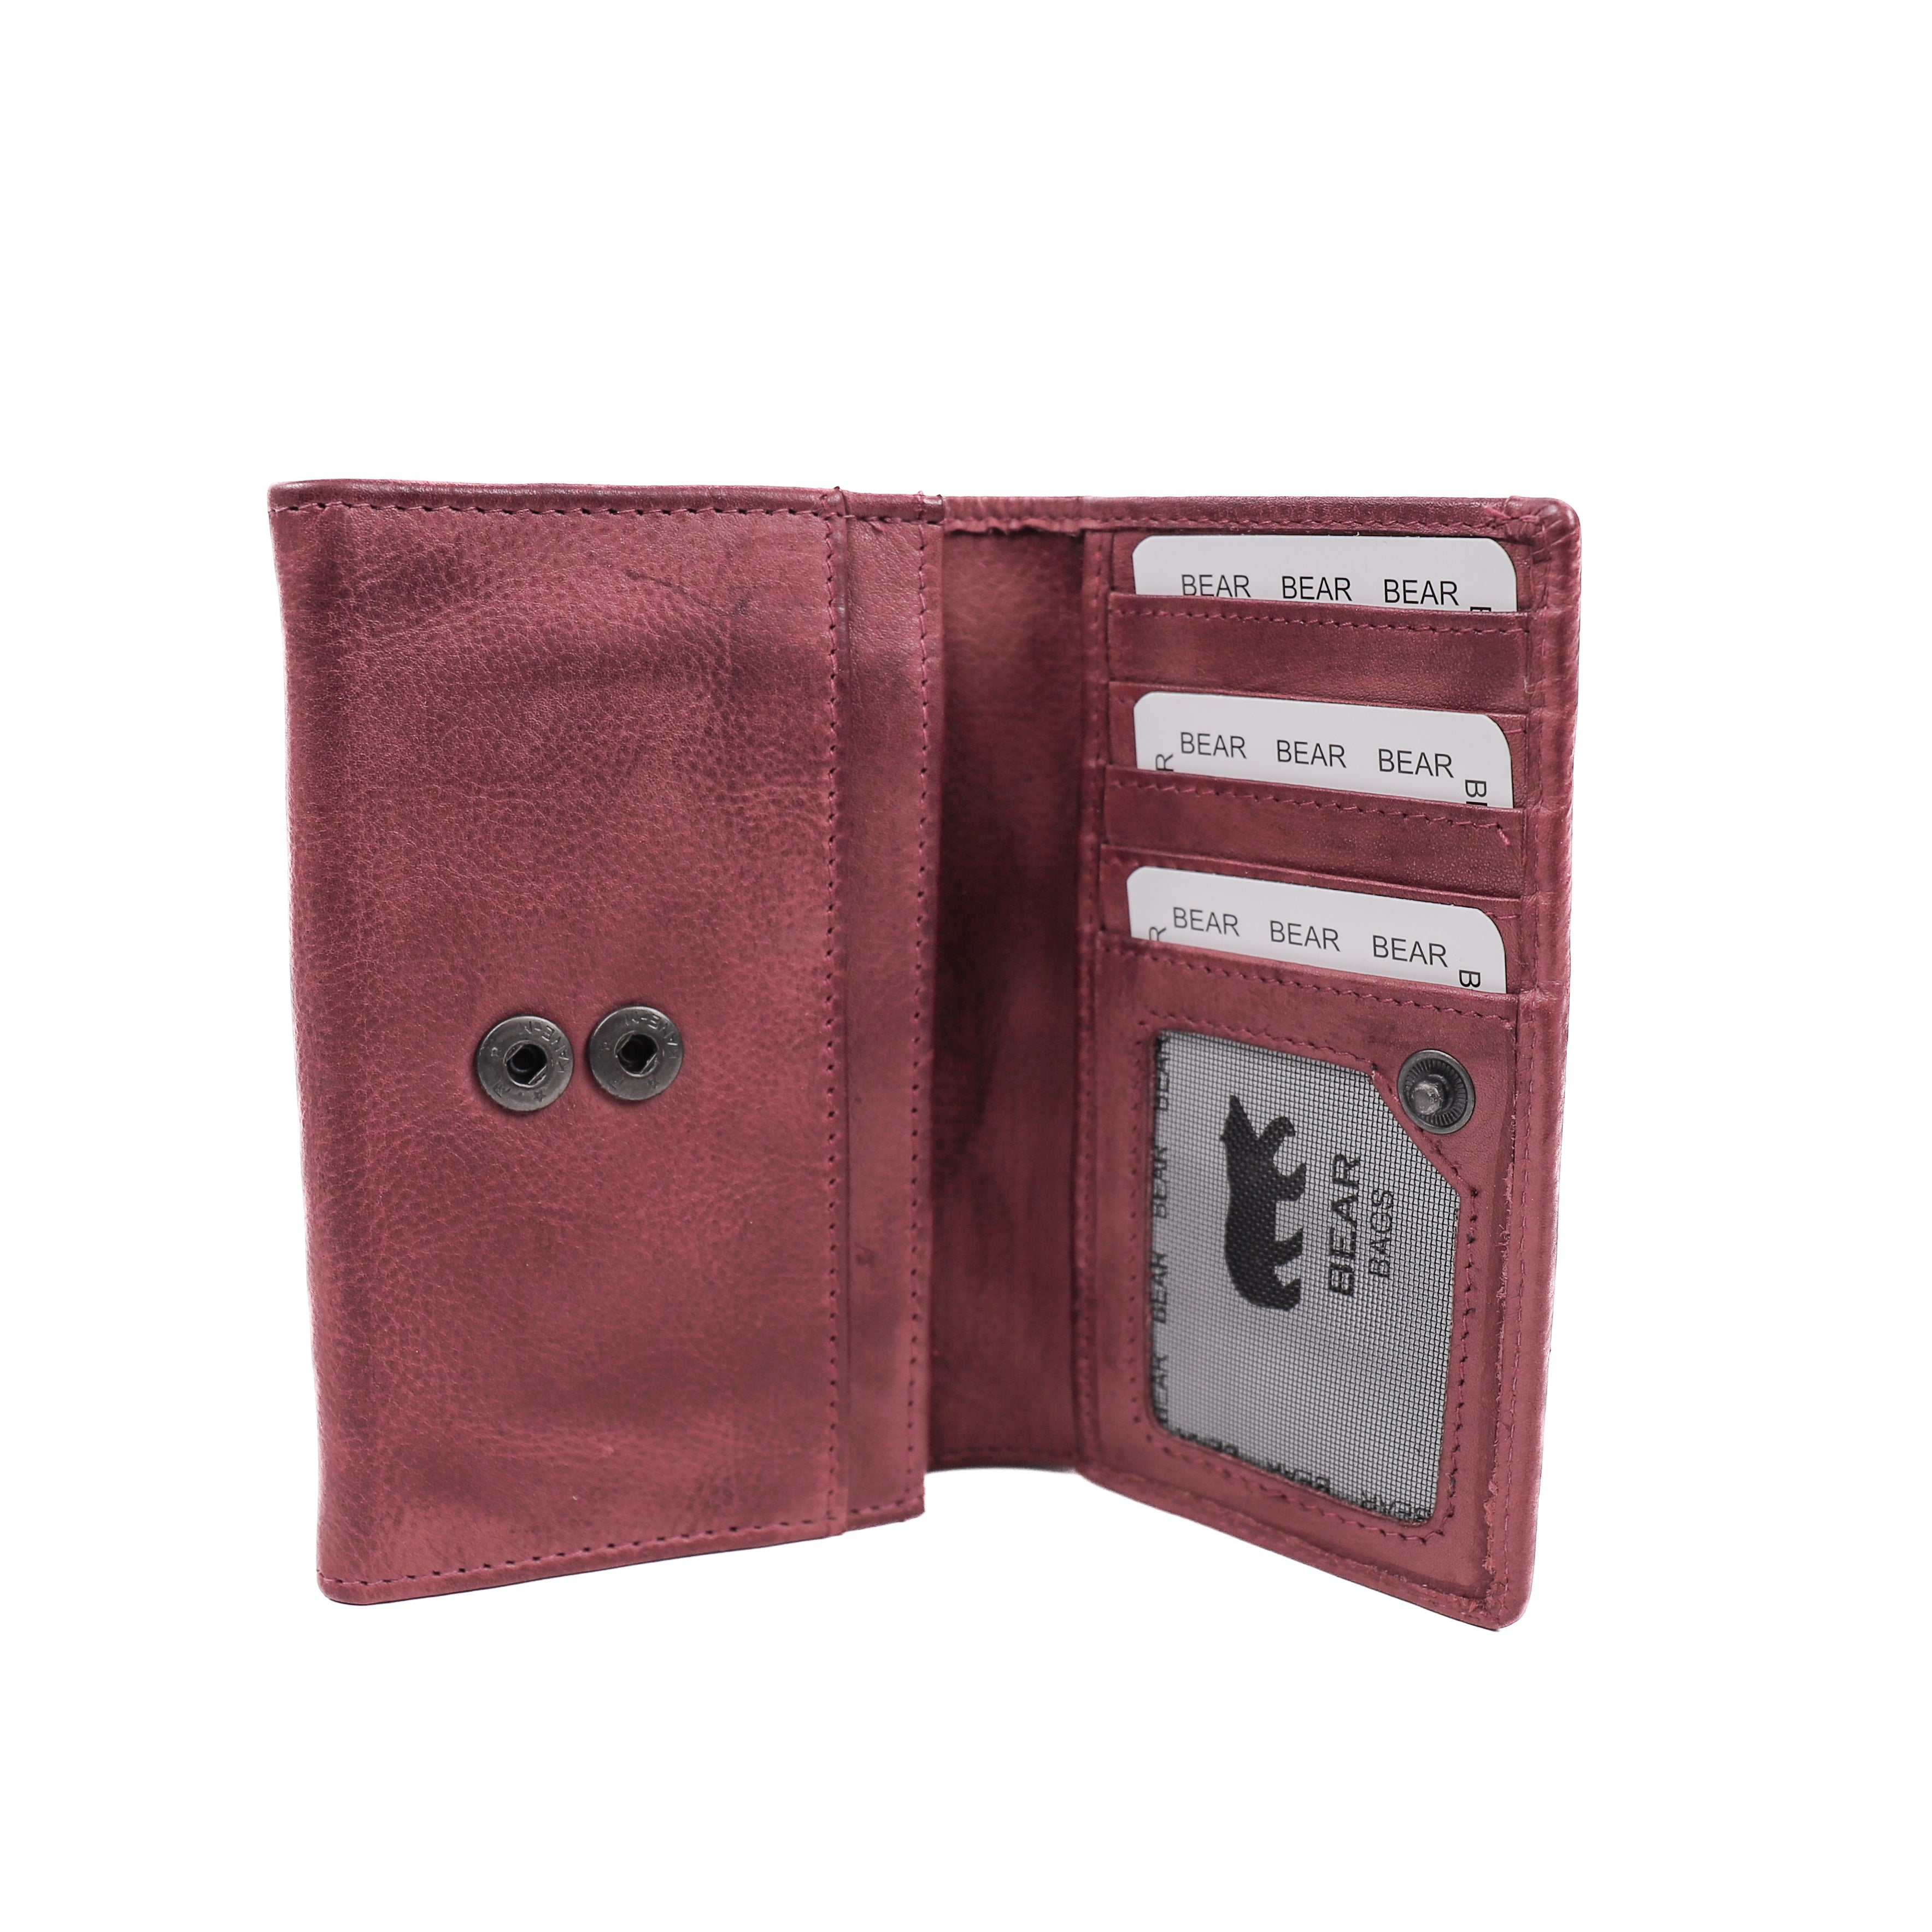 Wrap wallet 'Sweety' tufting